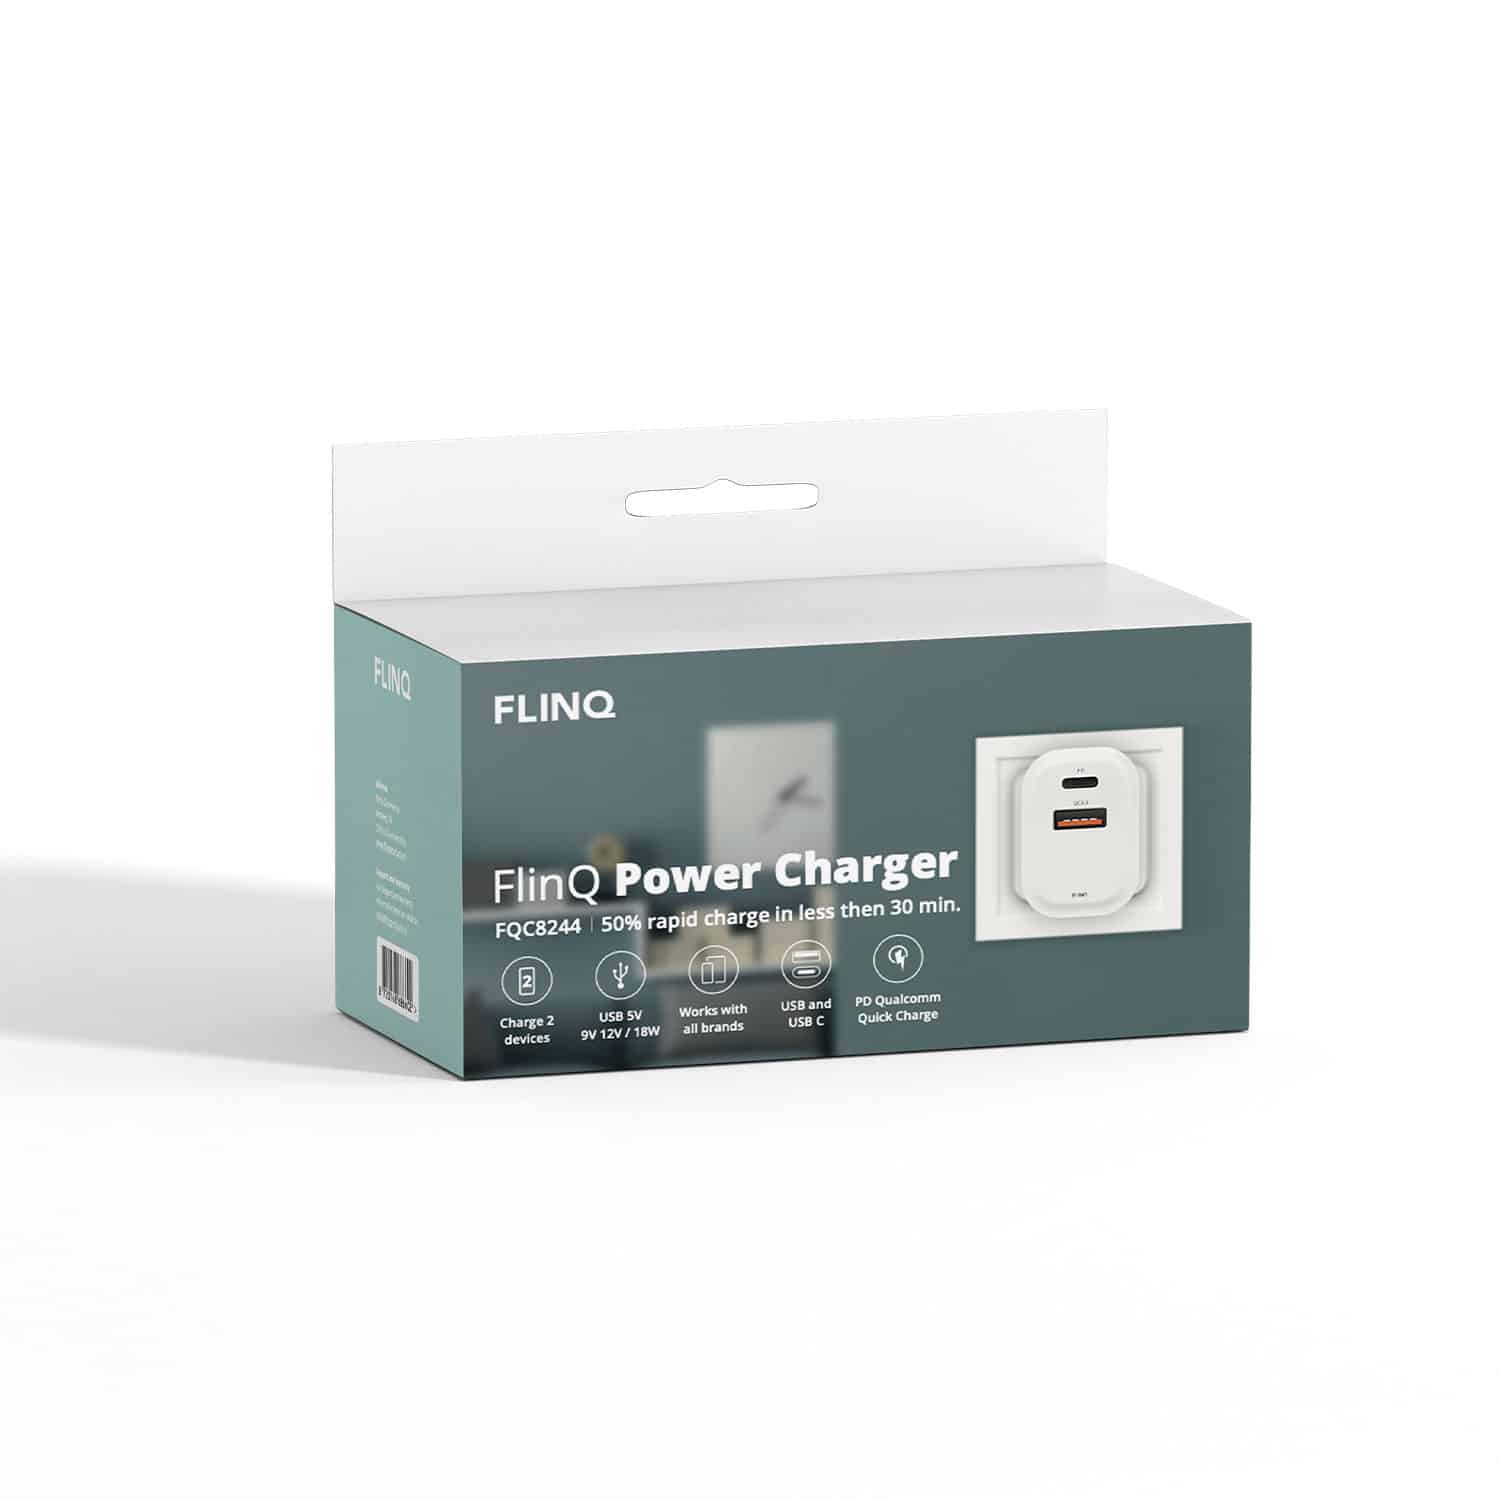 FlinQ-Power-charger-4